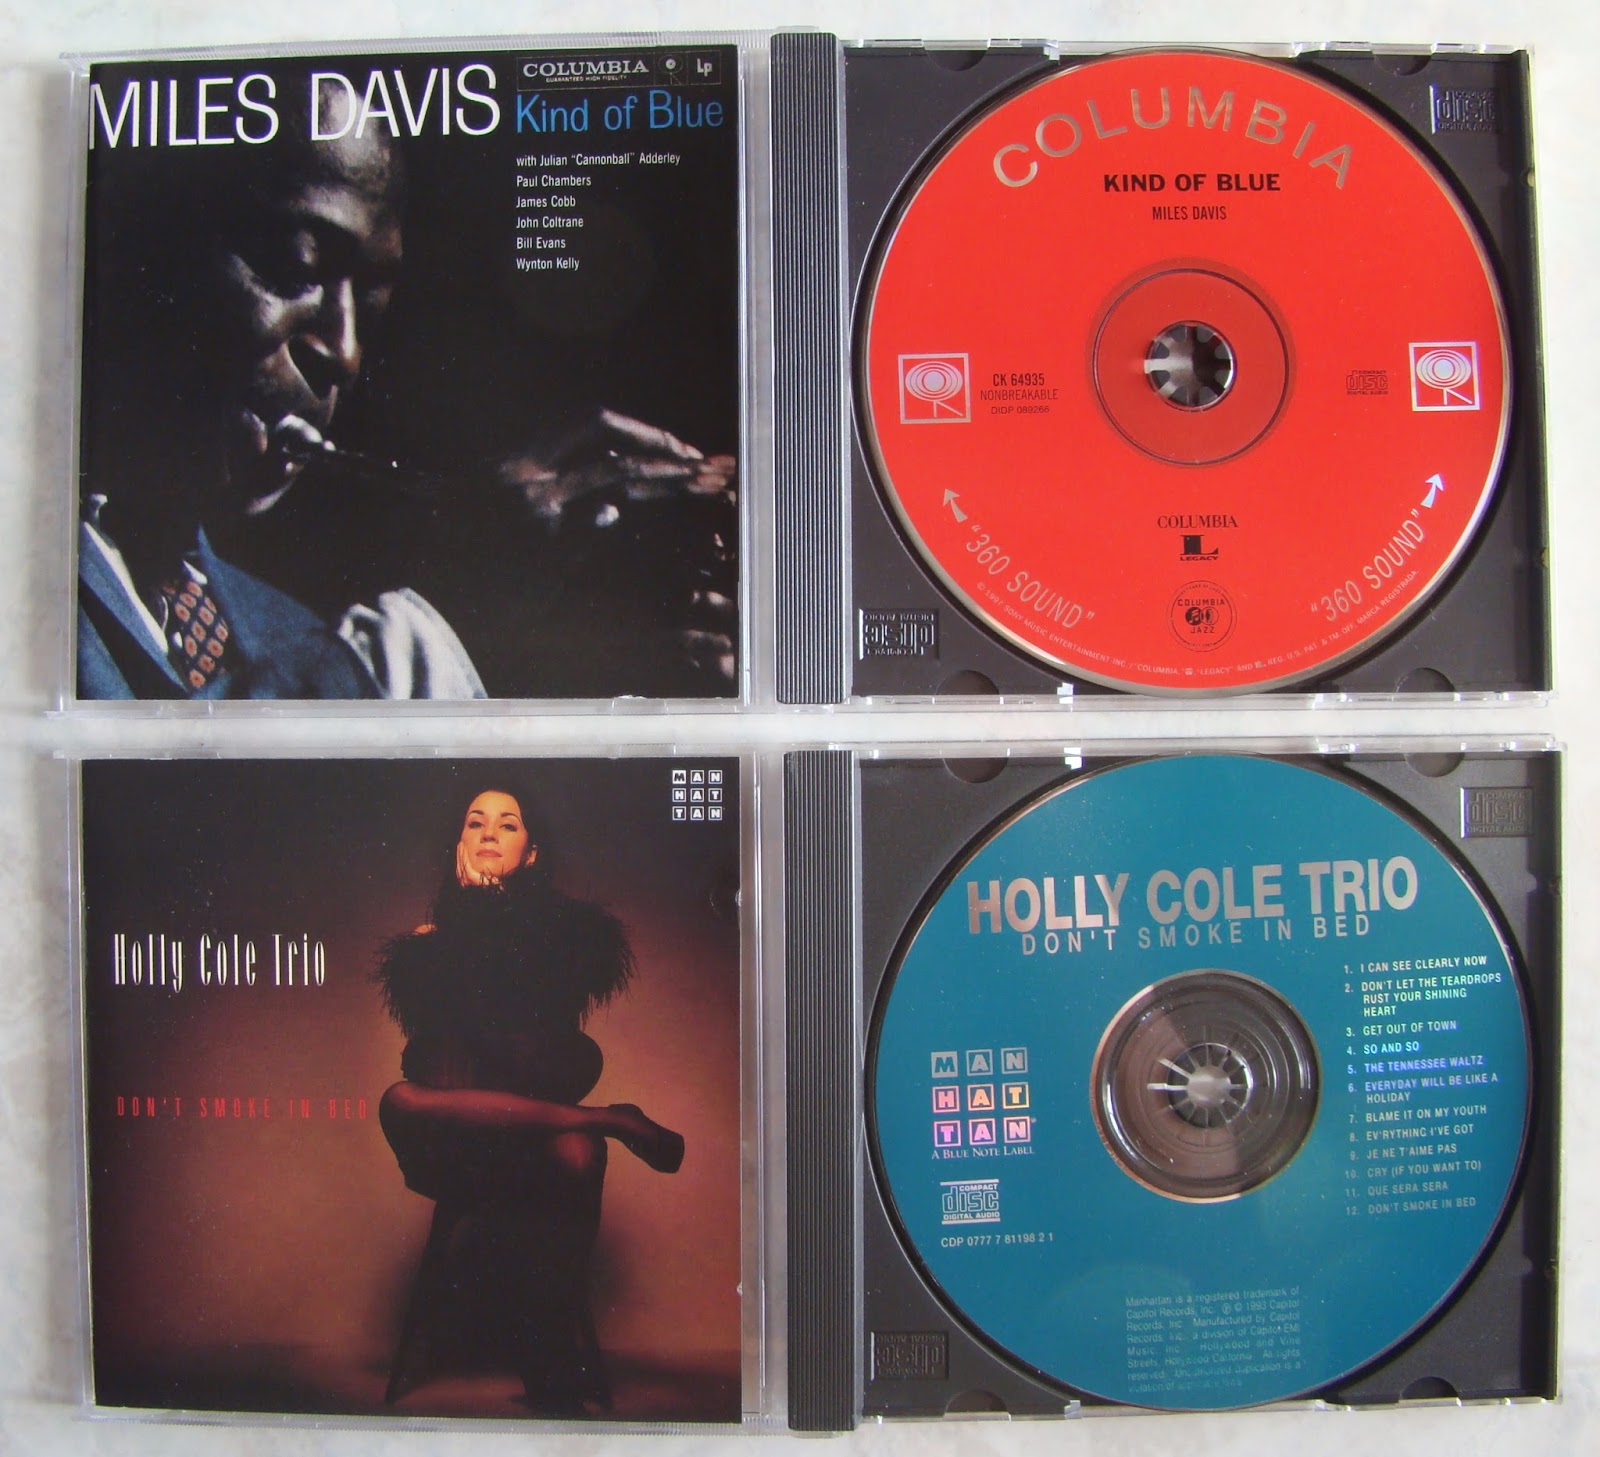 Imported audiophile CDs (sold) CD+miles+davis